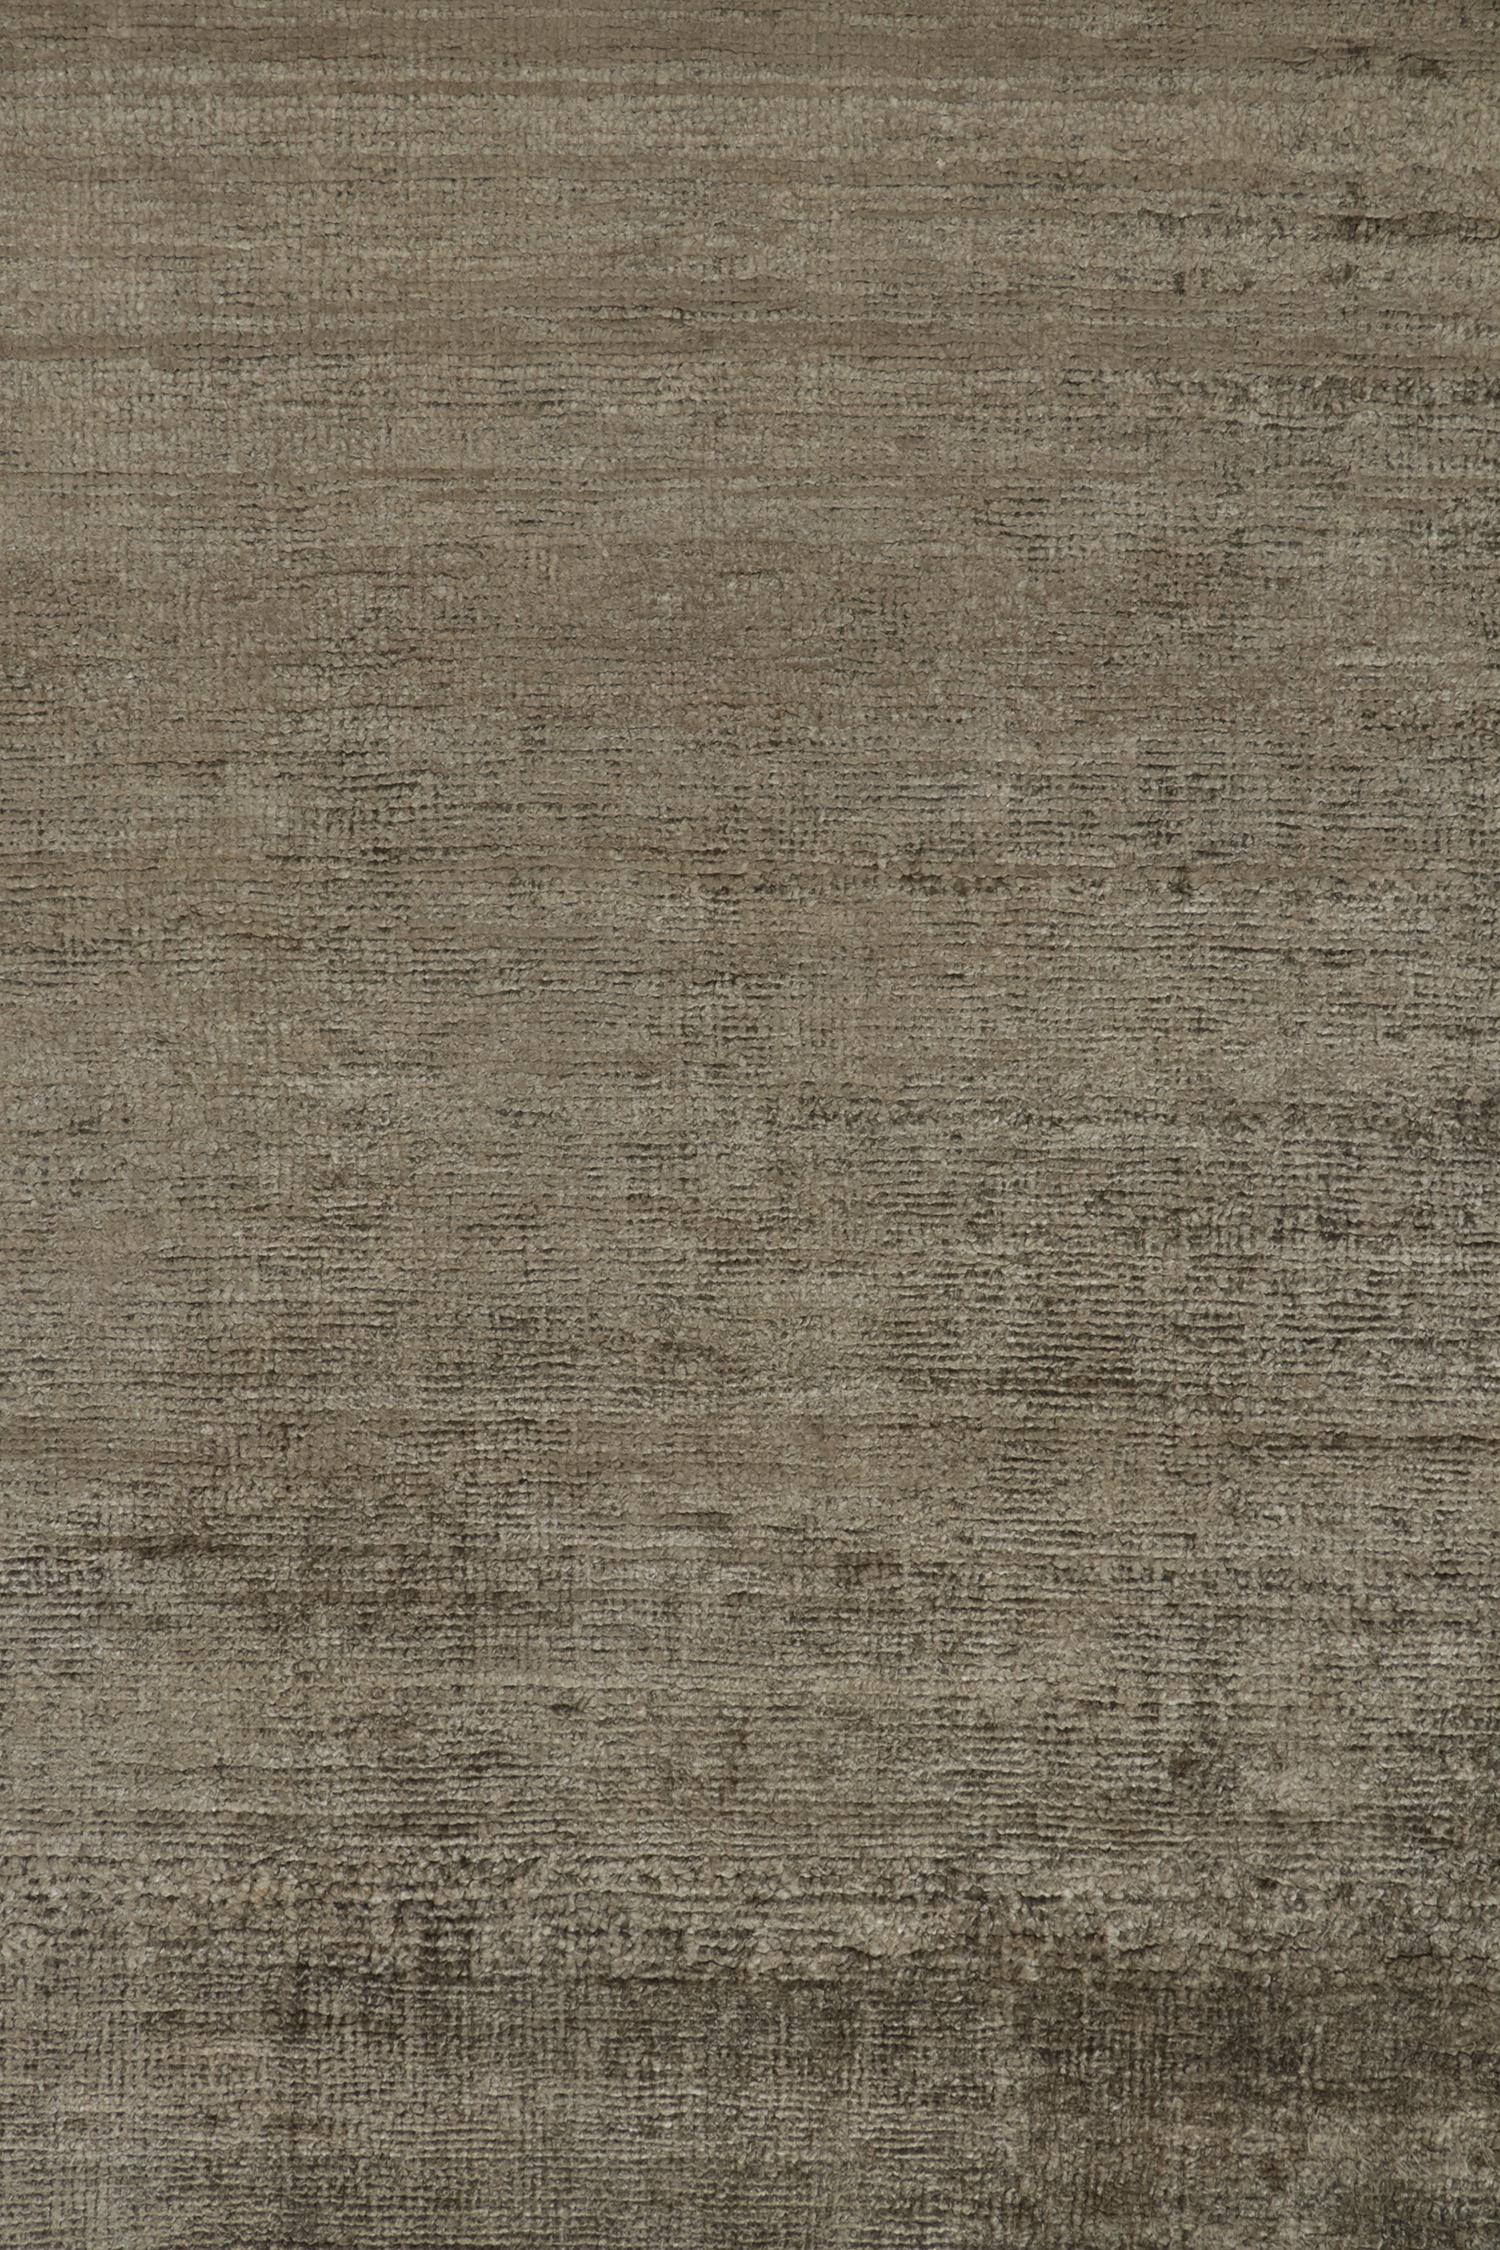 Contemporary Rug & Kilim’s Solid Gray Rug in Tone-on-tone Hand-Knotted Silk Striae For Sale